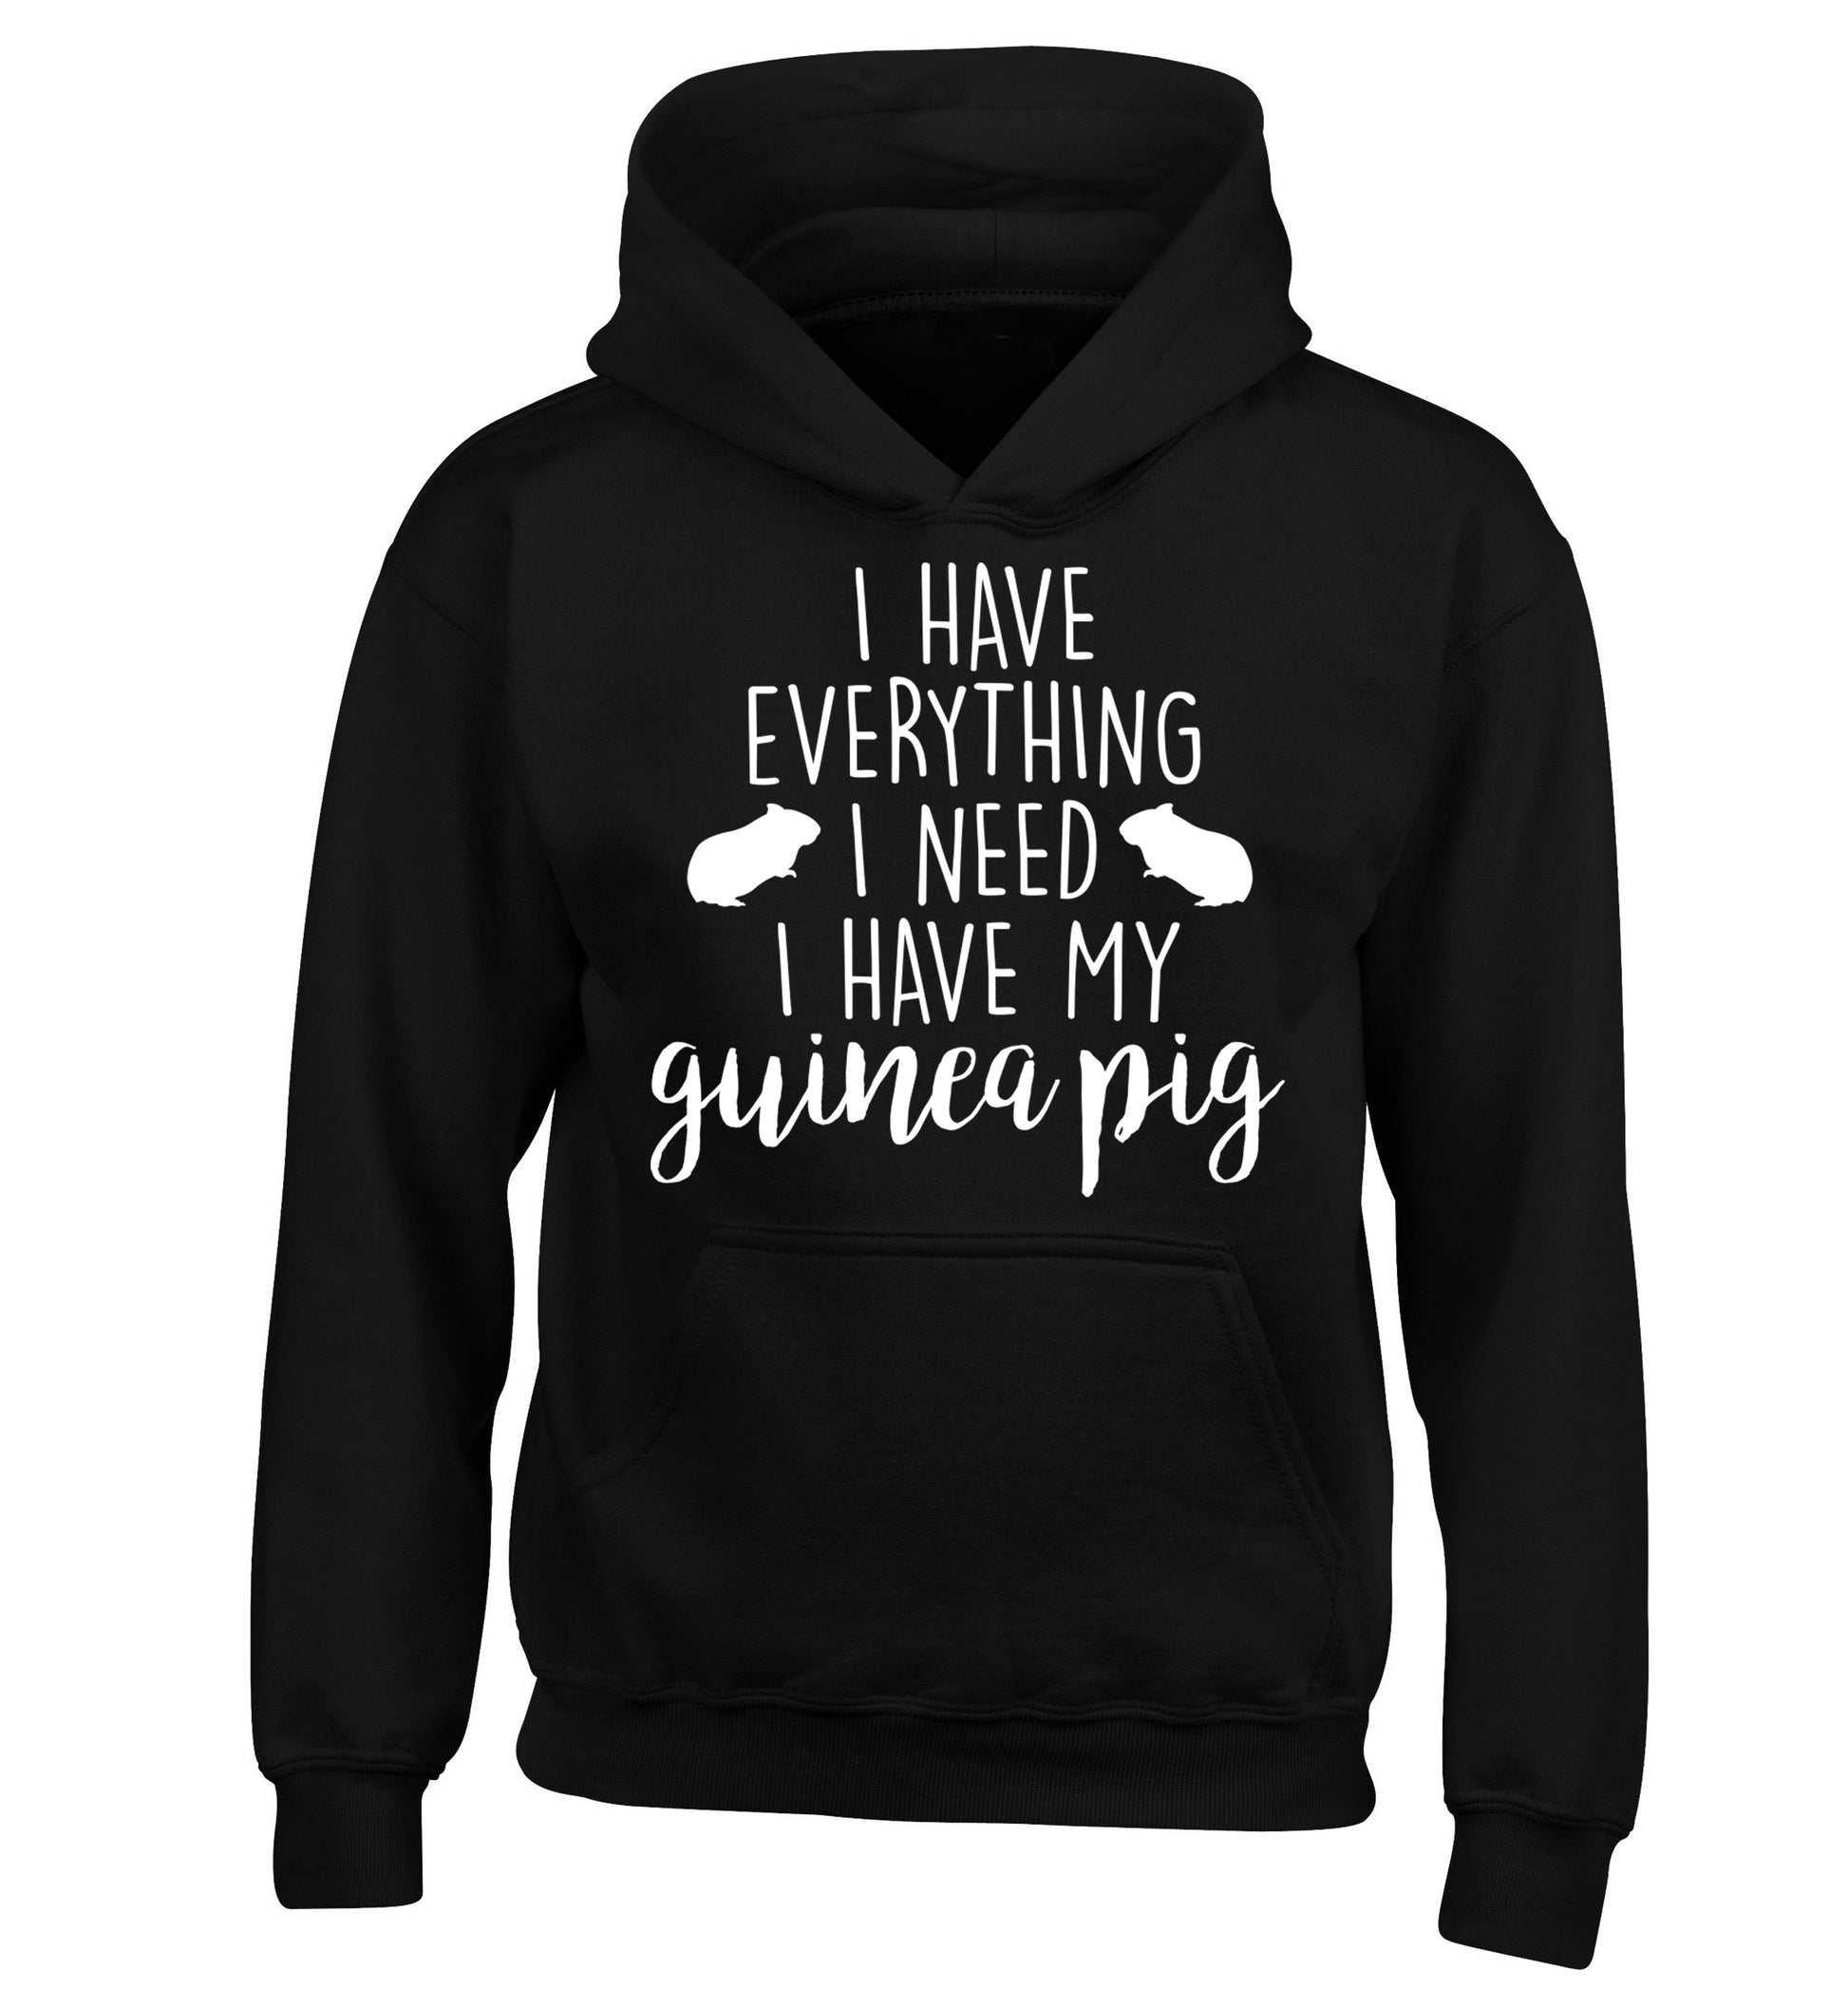 I have everything I need, I have my guinea pig children's black hoodie 12-14 Years